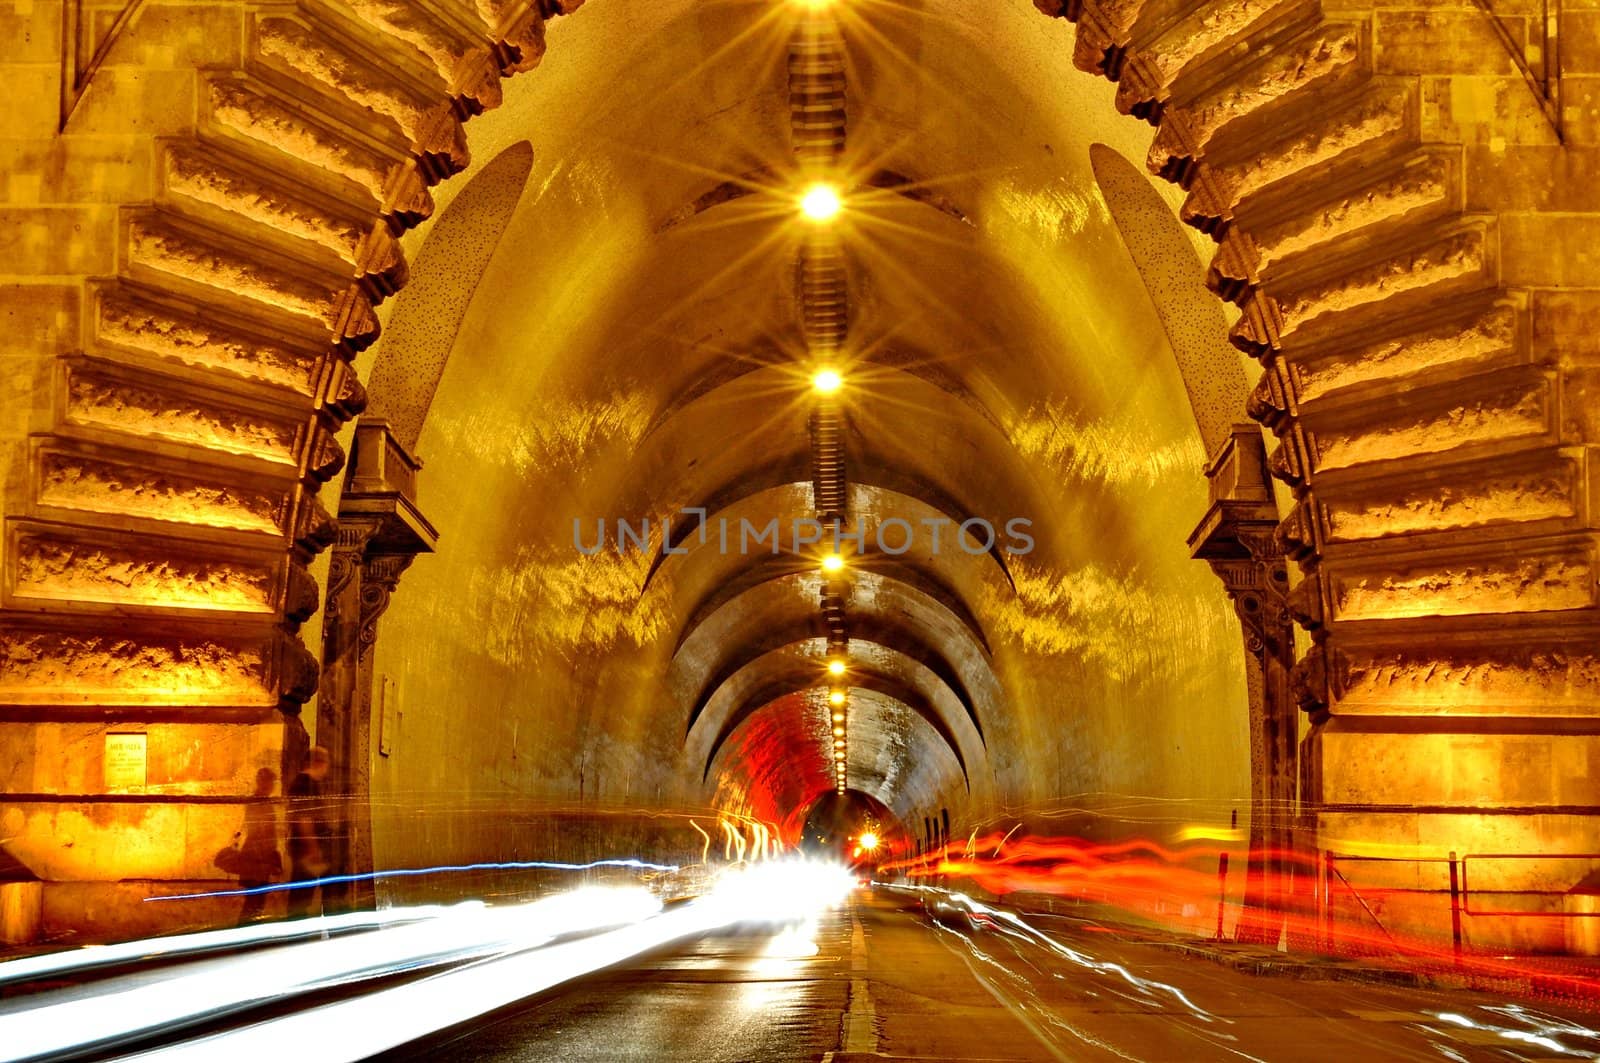 Entrance of a tunnel by anderm